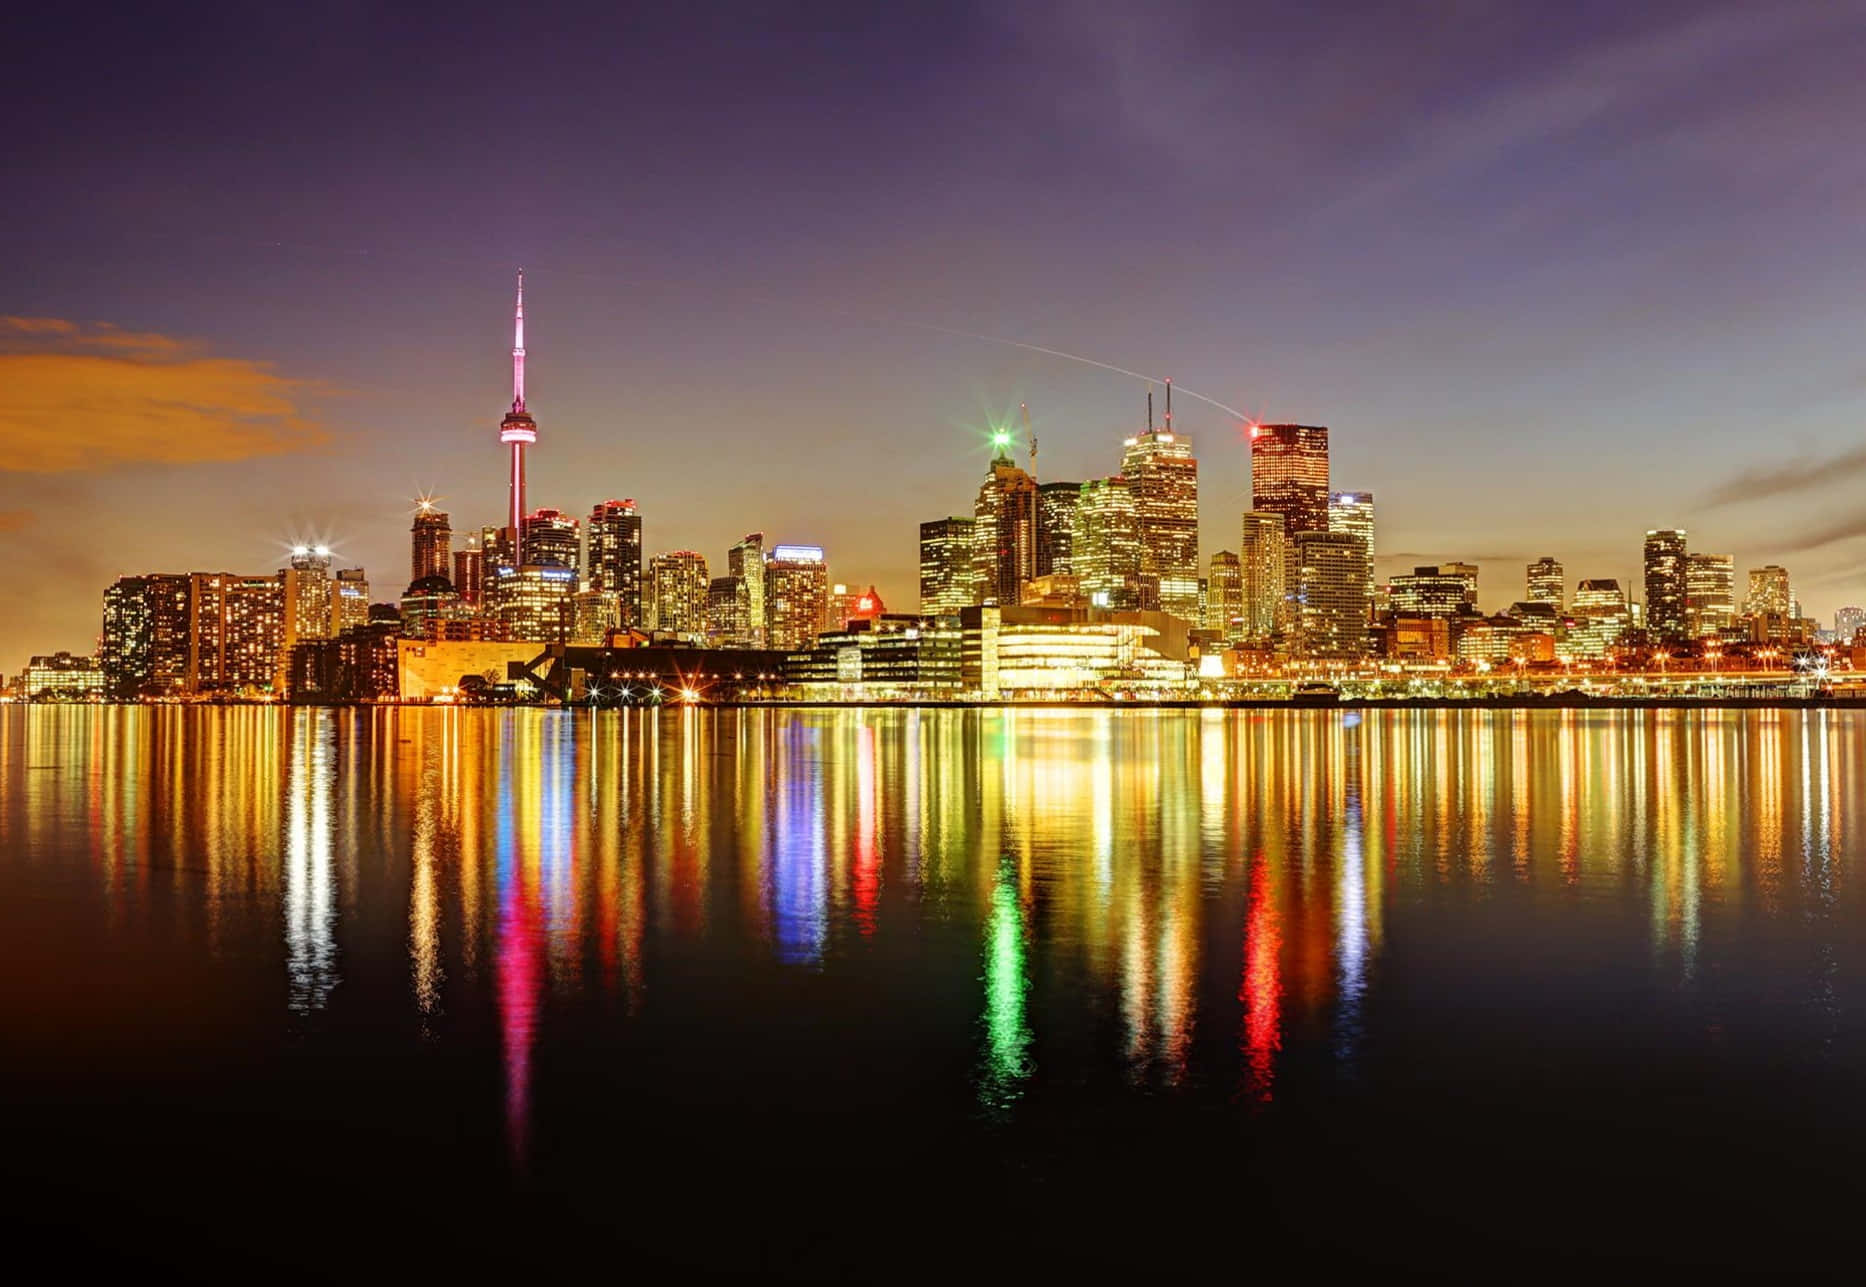 Toronto Skyline At Night With Colorful Lights Reflecting In The Water